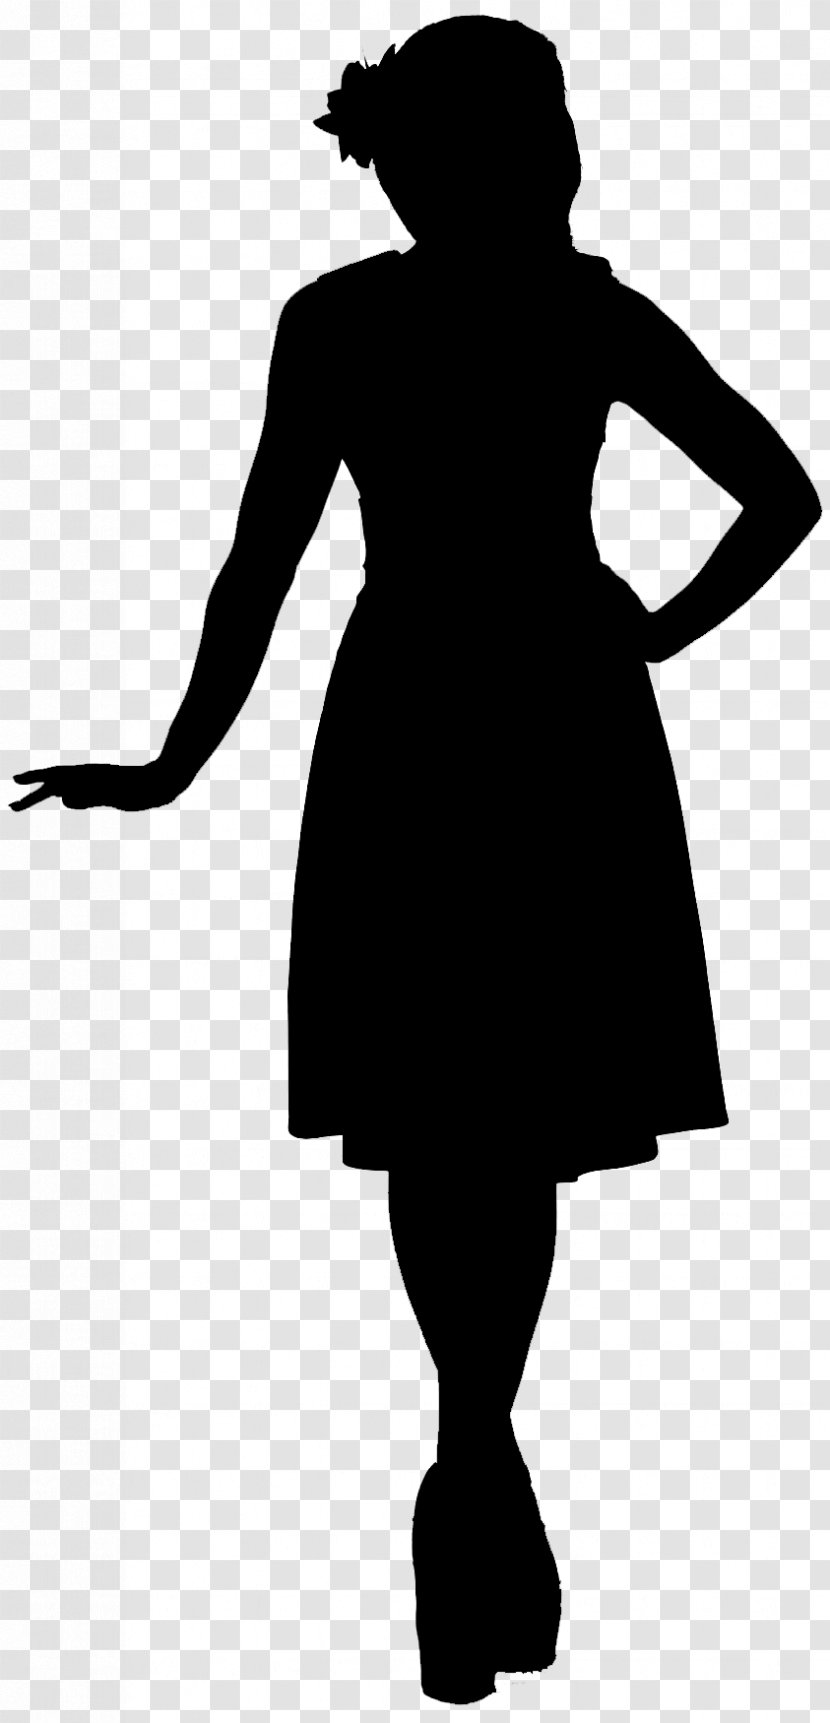 Hello, Dolly! Silhouette Drawing Stencil The Matchmaker - Dress - Sleeve Transparent PNG